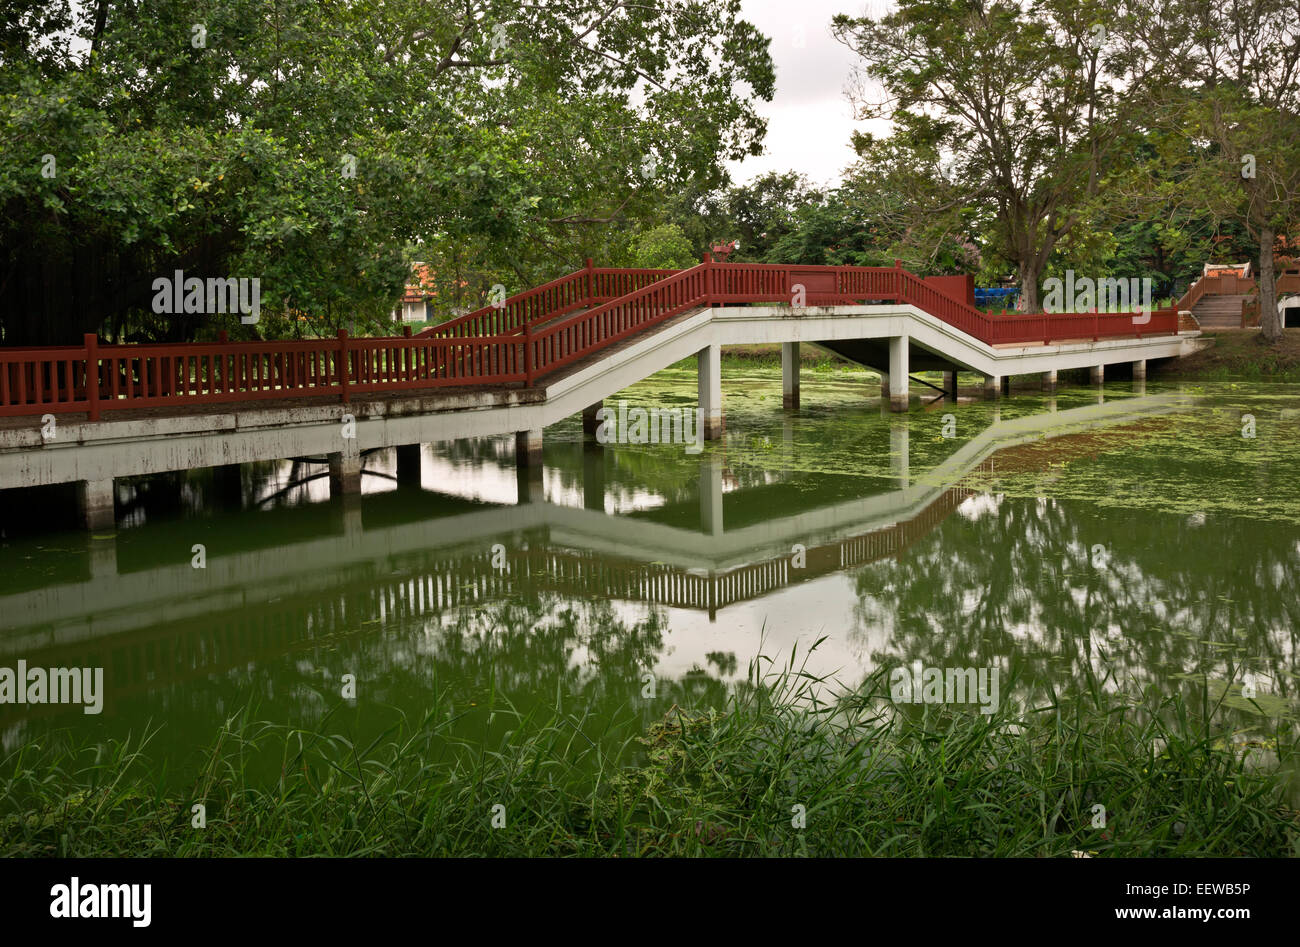 TH00324-00...THAILAND - Bridge over a canal in the Phra Ram Park located at the center of the Ayutthaya Historical Park. Stock Photo